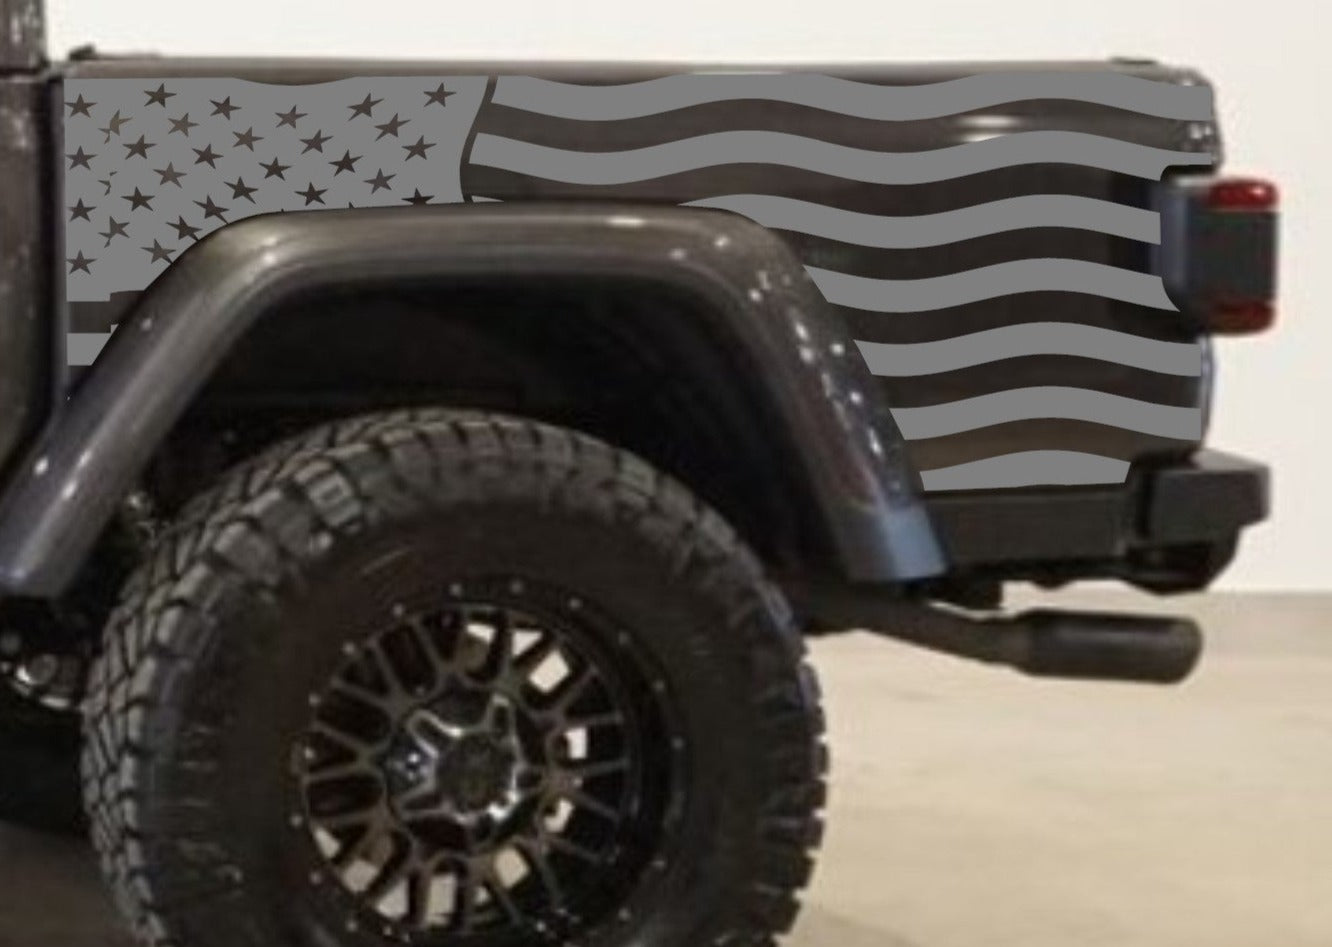 Set of American Flag Decal Patriotic Decal for Jeep Gladiator | Gladiator Truck Bed